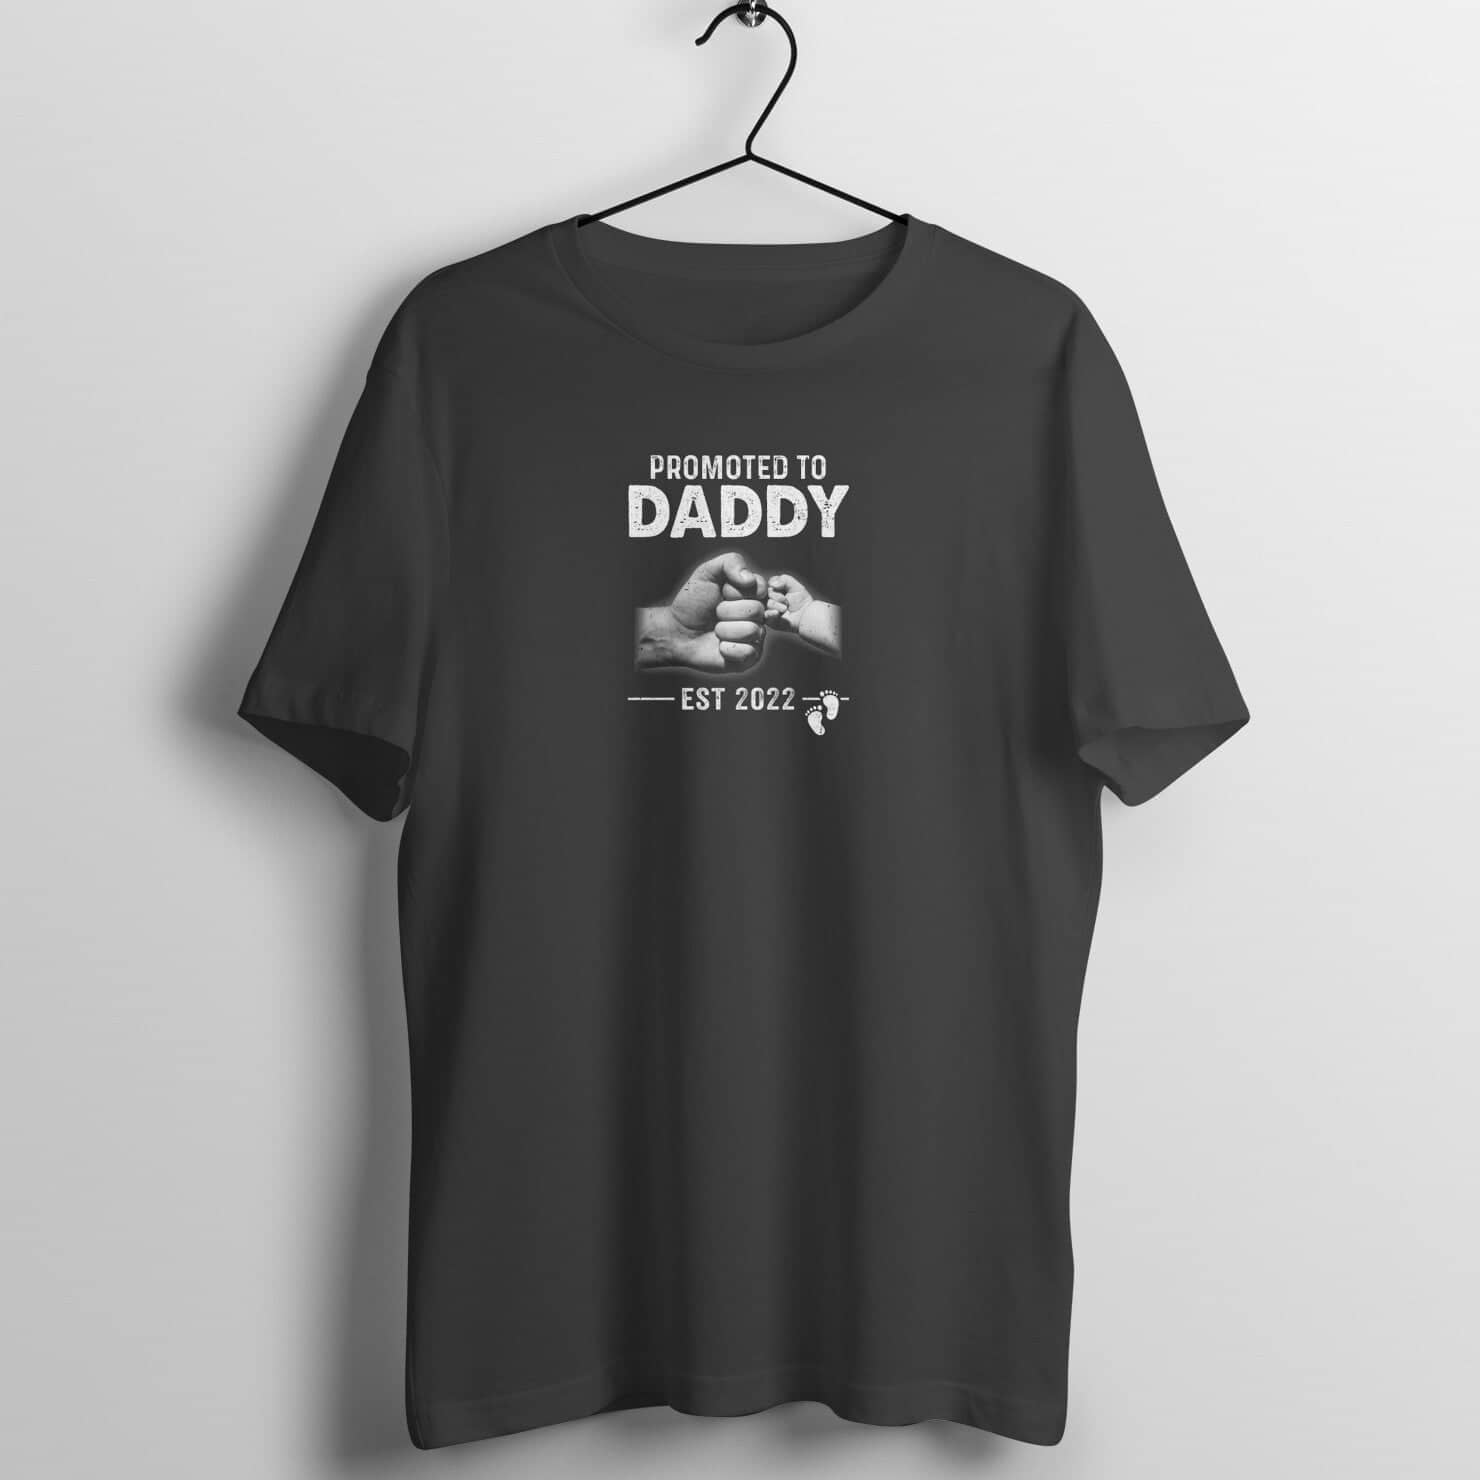 Promoted to Daddy Est. 2022 Fist Bump Special Black T Shirt for Men and Women freeshipping - Catch My Drift India